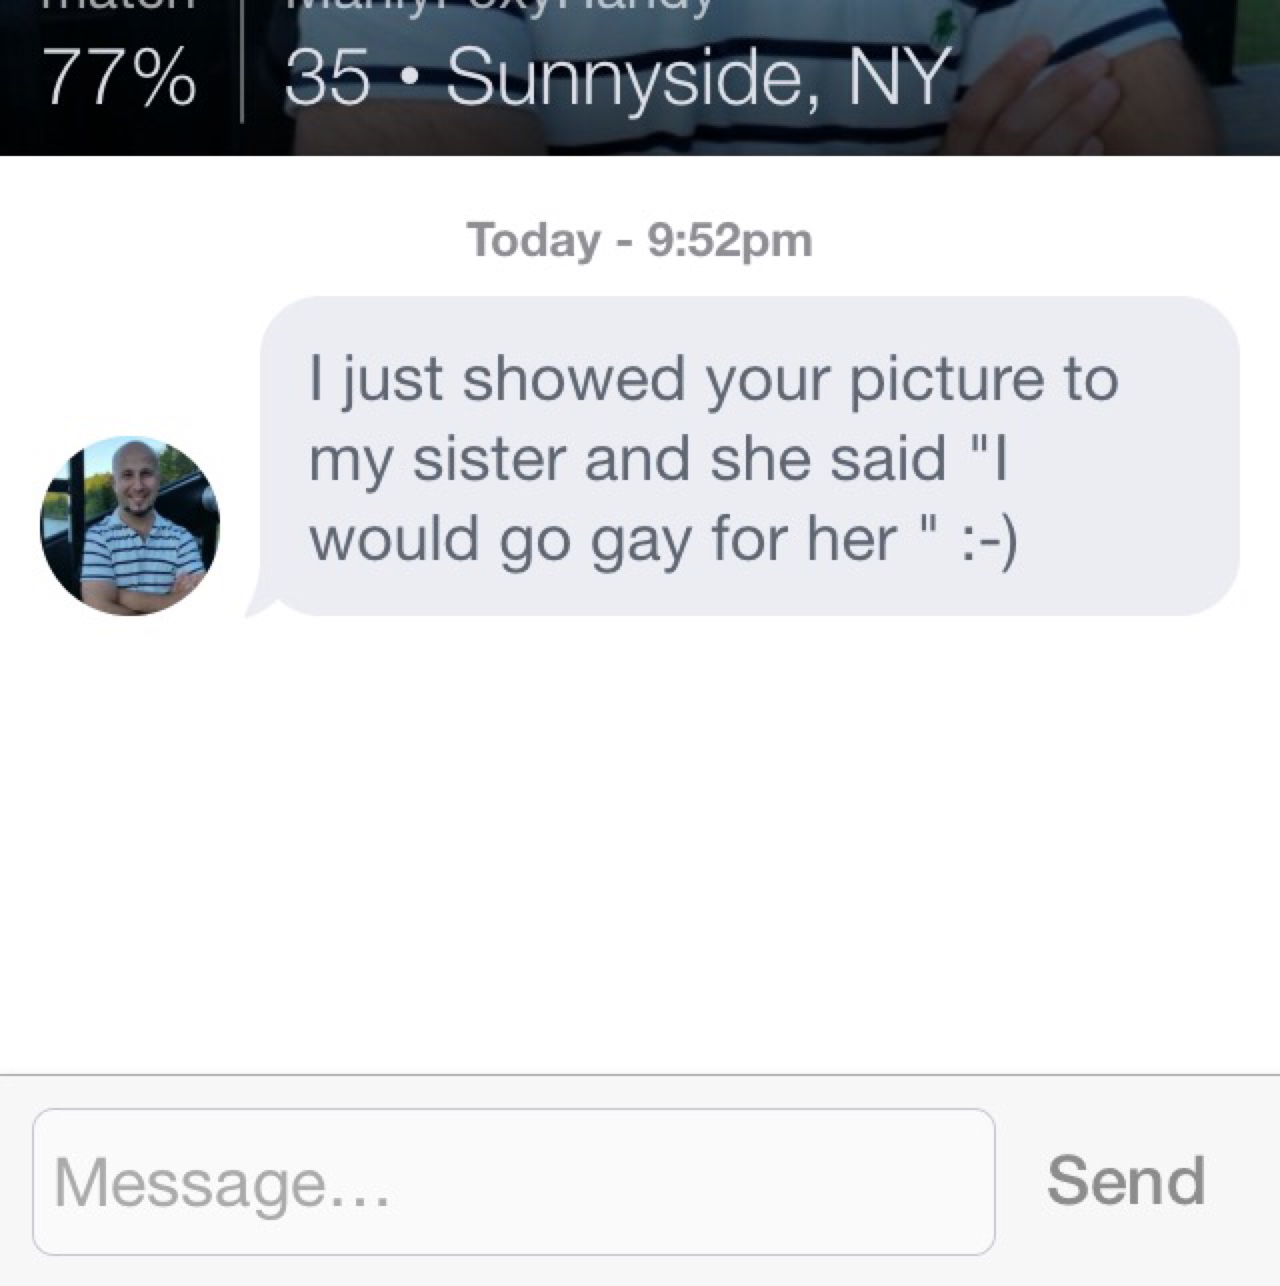 website - Liv 77% 35 Sunnyside, Ny Today pm I just showed your picture to my sister and she said "I. would go gay for her " Message... Send